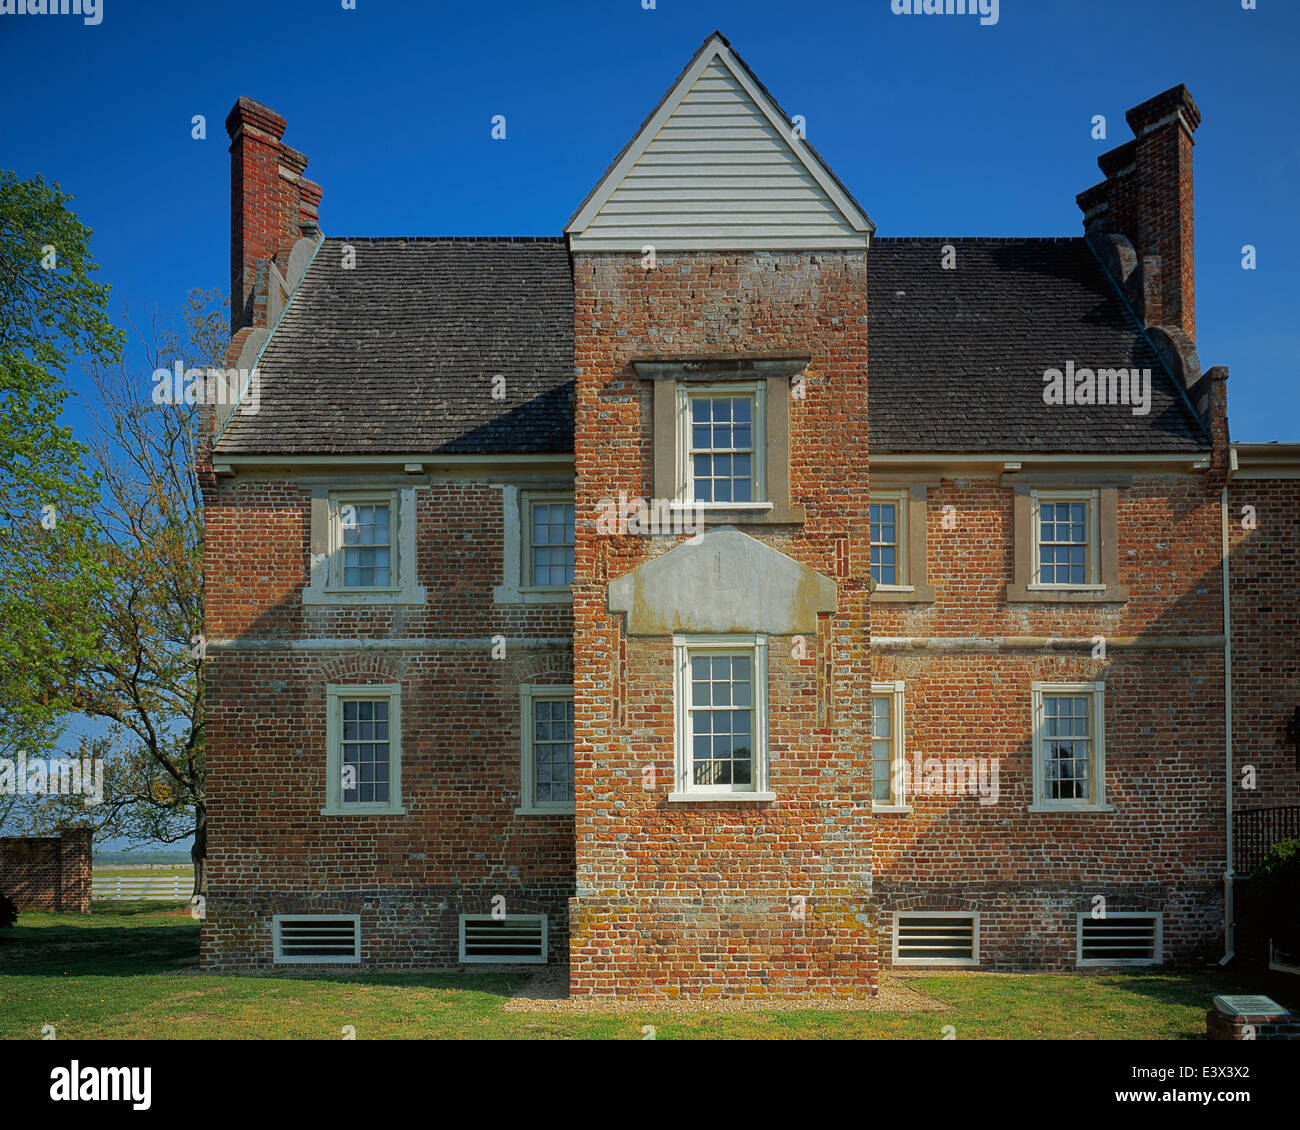 Bacon's Castle: America's Oldest Brick Residence and the Ghosts